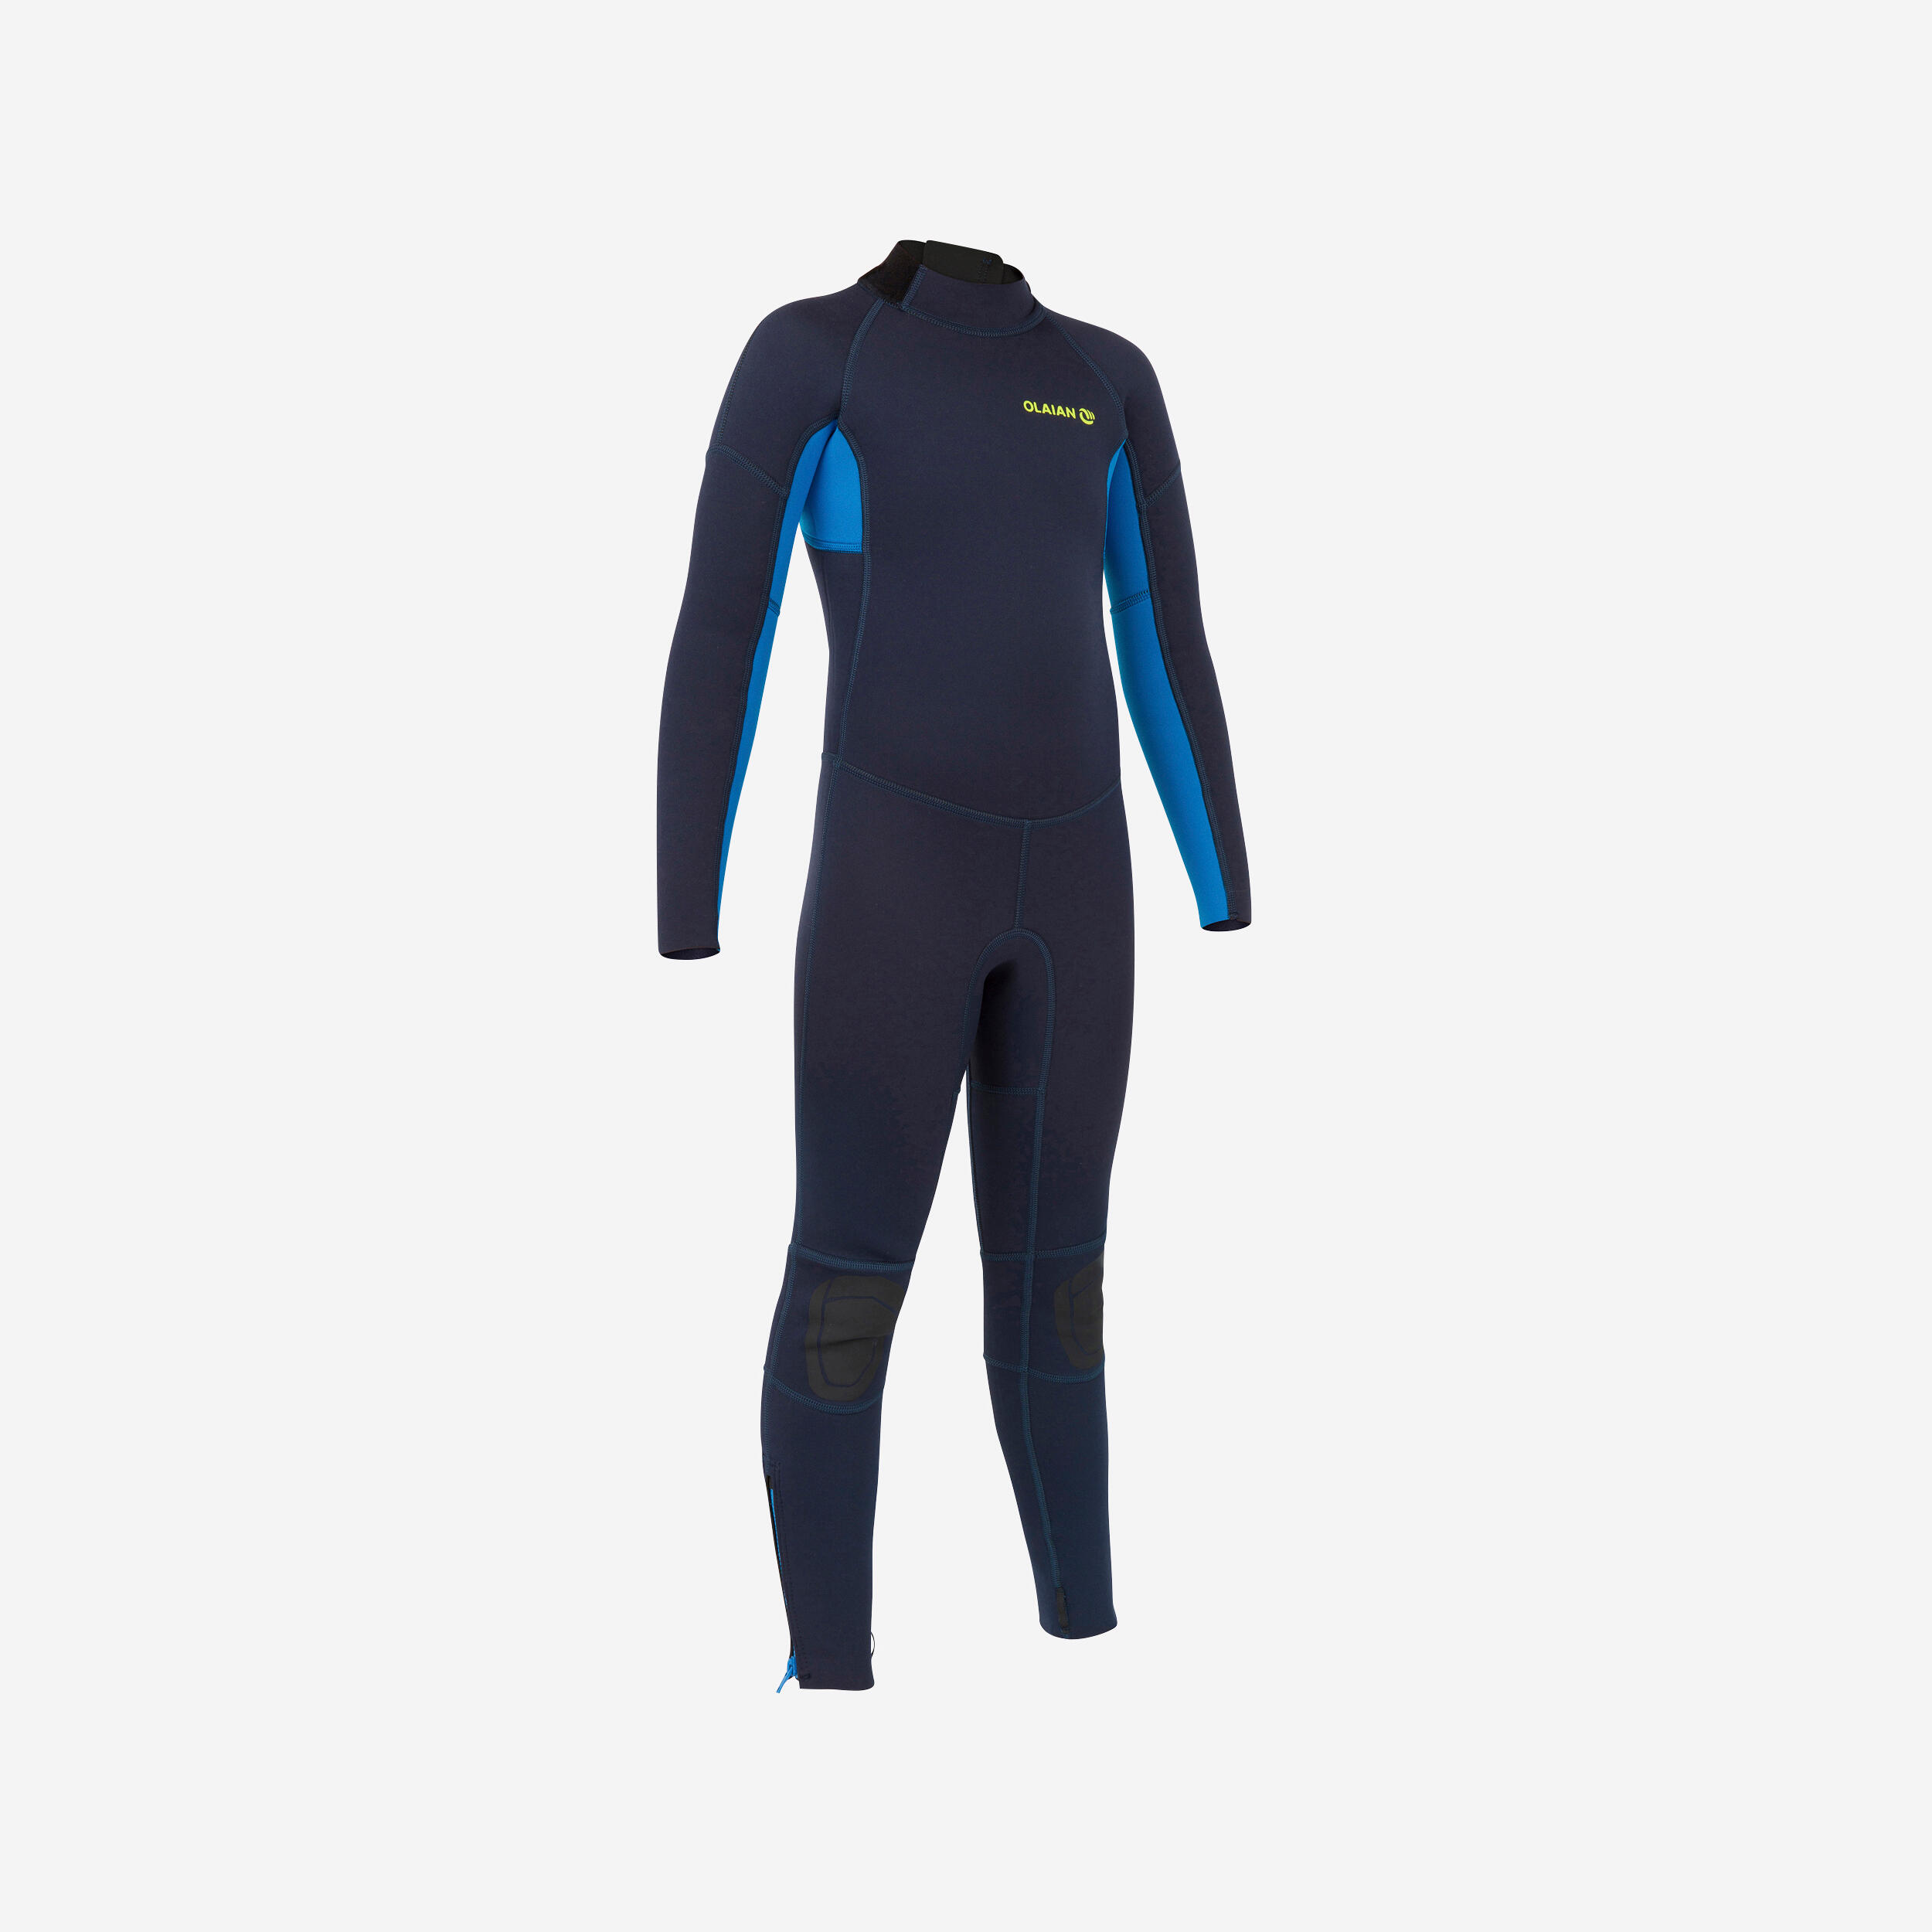 Blackcomb Wetsuit 4/3 mm: Canadian Cold Water Wetsuit